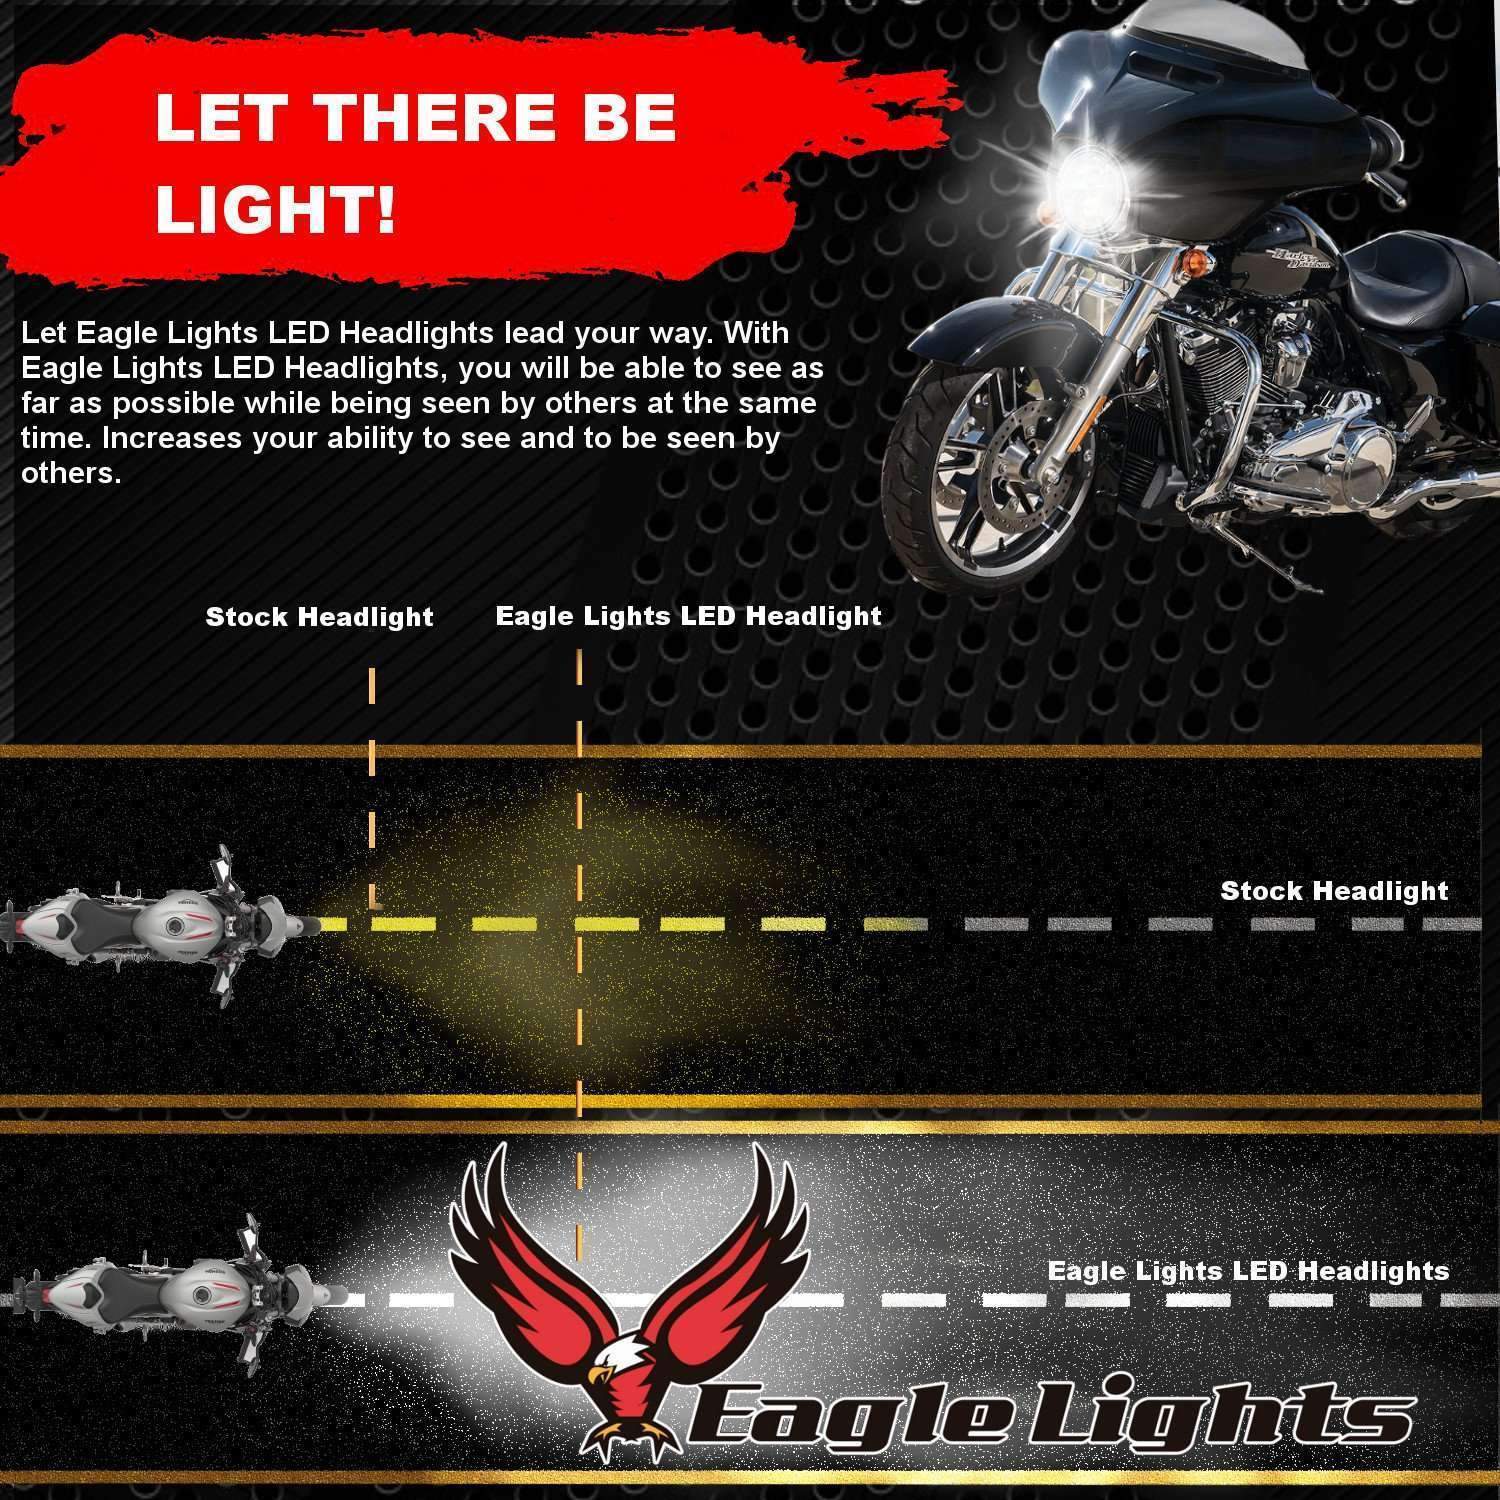 7” LED Headlight And Passing Lights - Eagle Lights 8700 Chrome Harley 7" Round LED Headlight With Matching Chrome Passing Lamps For Harley Davidson Motorcycles*